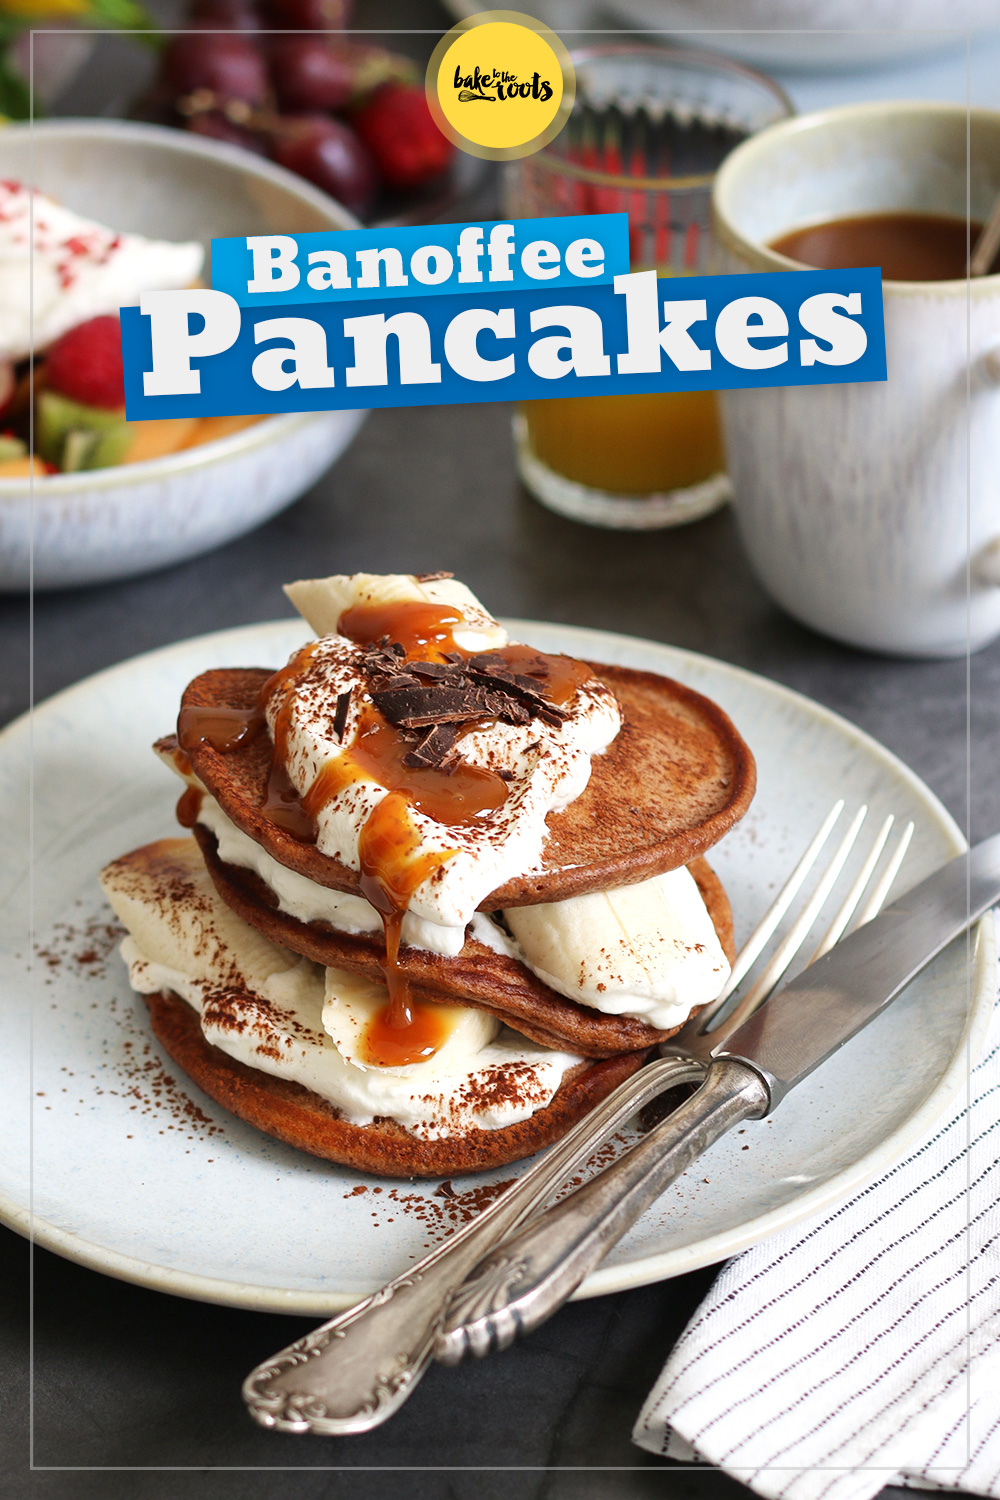 Banoffee Chocolate Pancakes | Bake to the roots